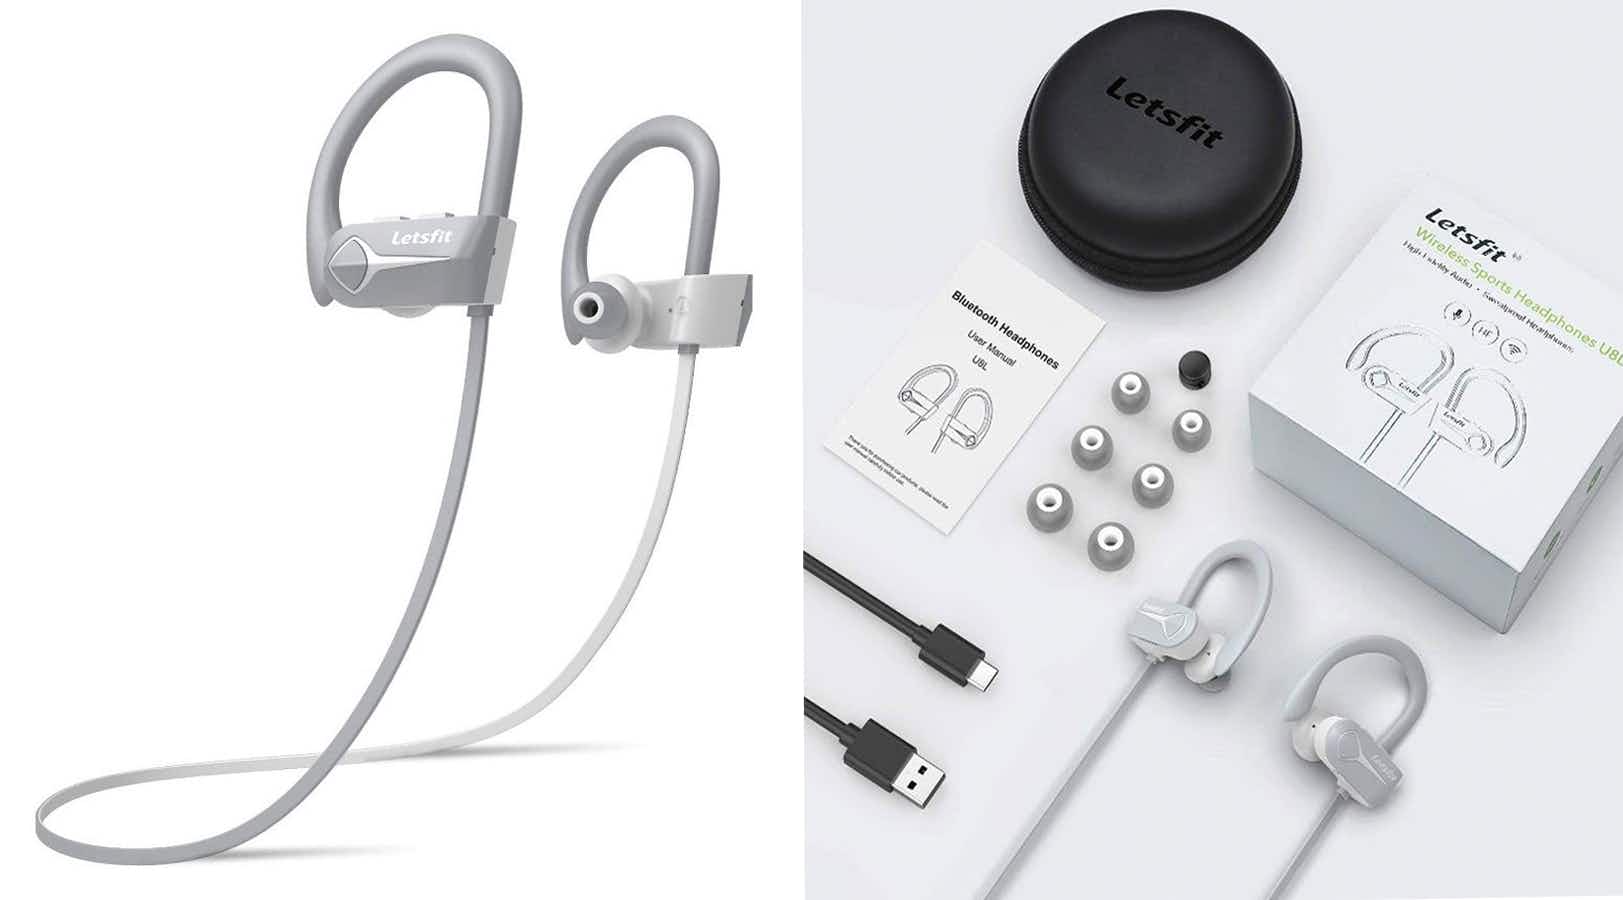 Letsfit Bluetooth Wireless Earbuds on a white background next to its box and contents laid out.